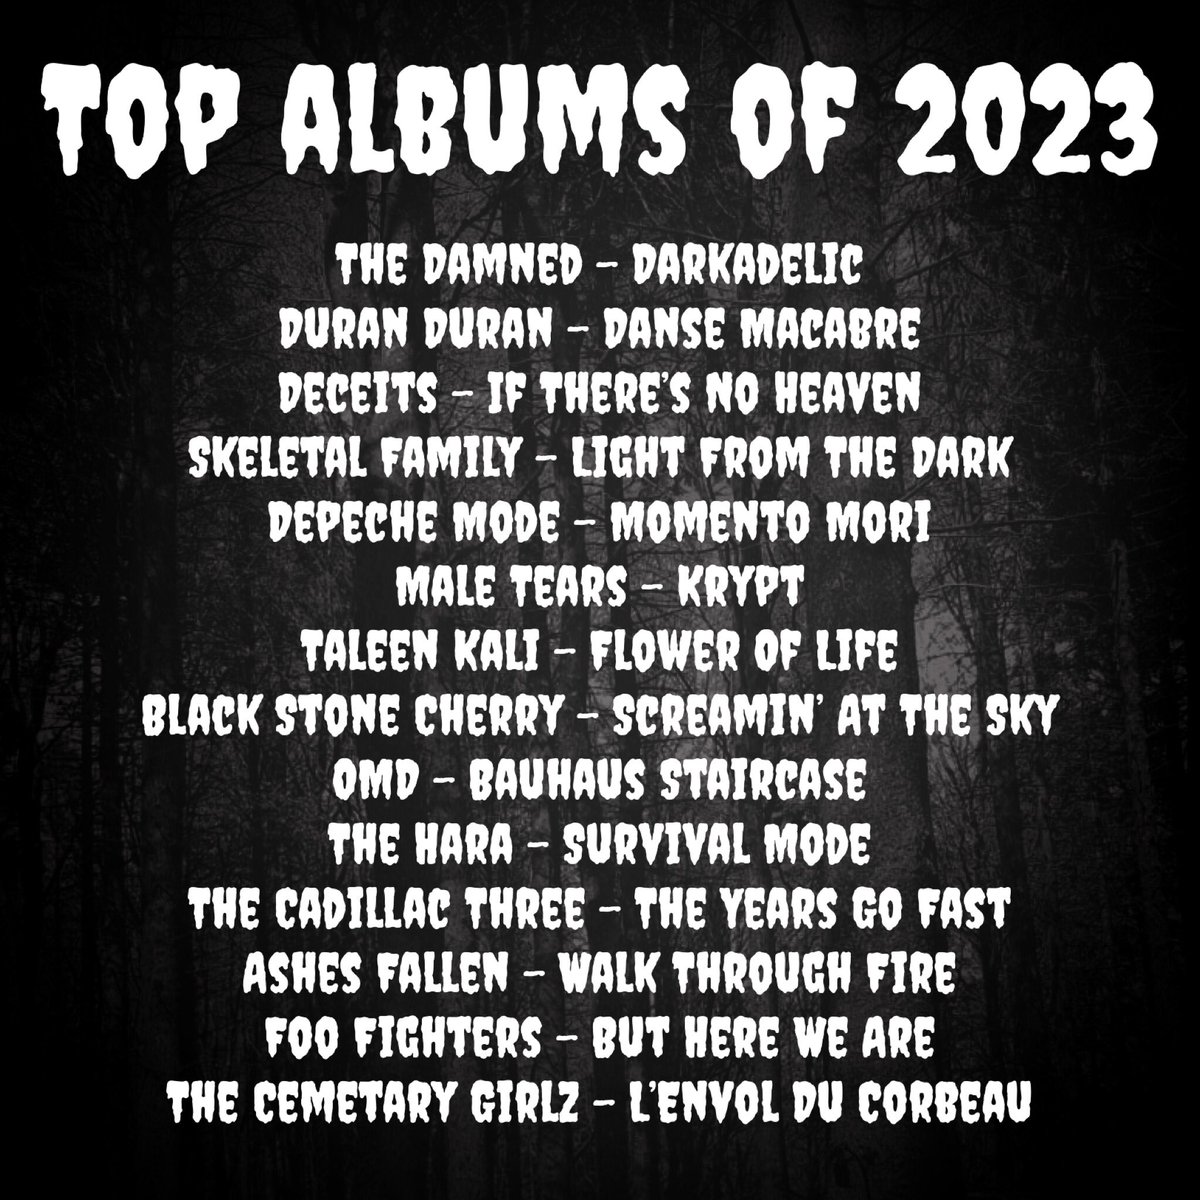 My top 2023 album releases (in no particular order) 🖤 @thedamned @duranduran @deceits_band @FamilySkeletal @depechemode @maletearsband @taleenkali @OfficialOMD @TheHaraBand @thecadillac3 @ashesfallengoth @foofighters @cemetarygirlz